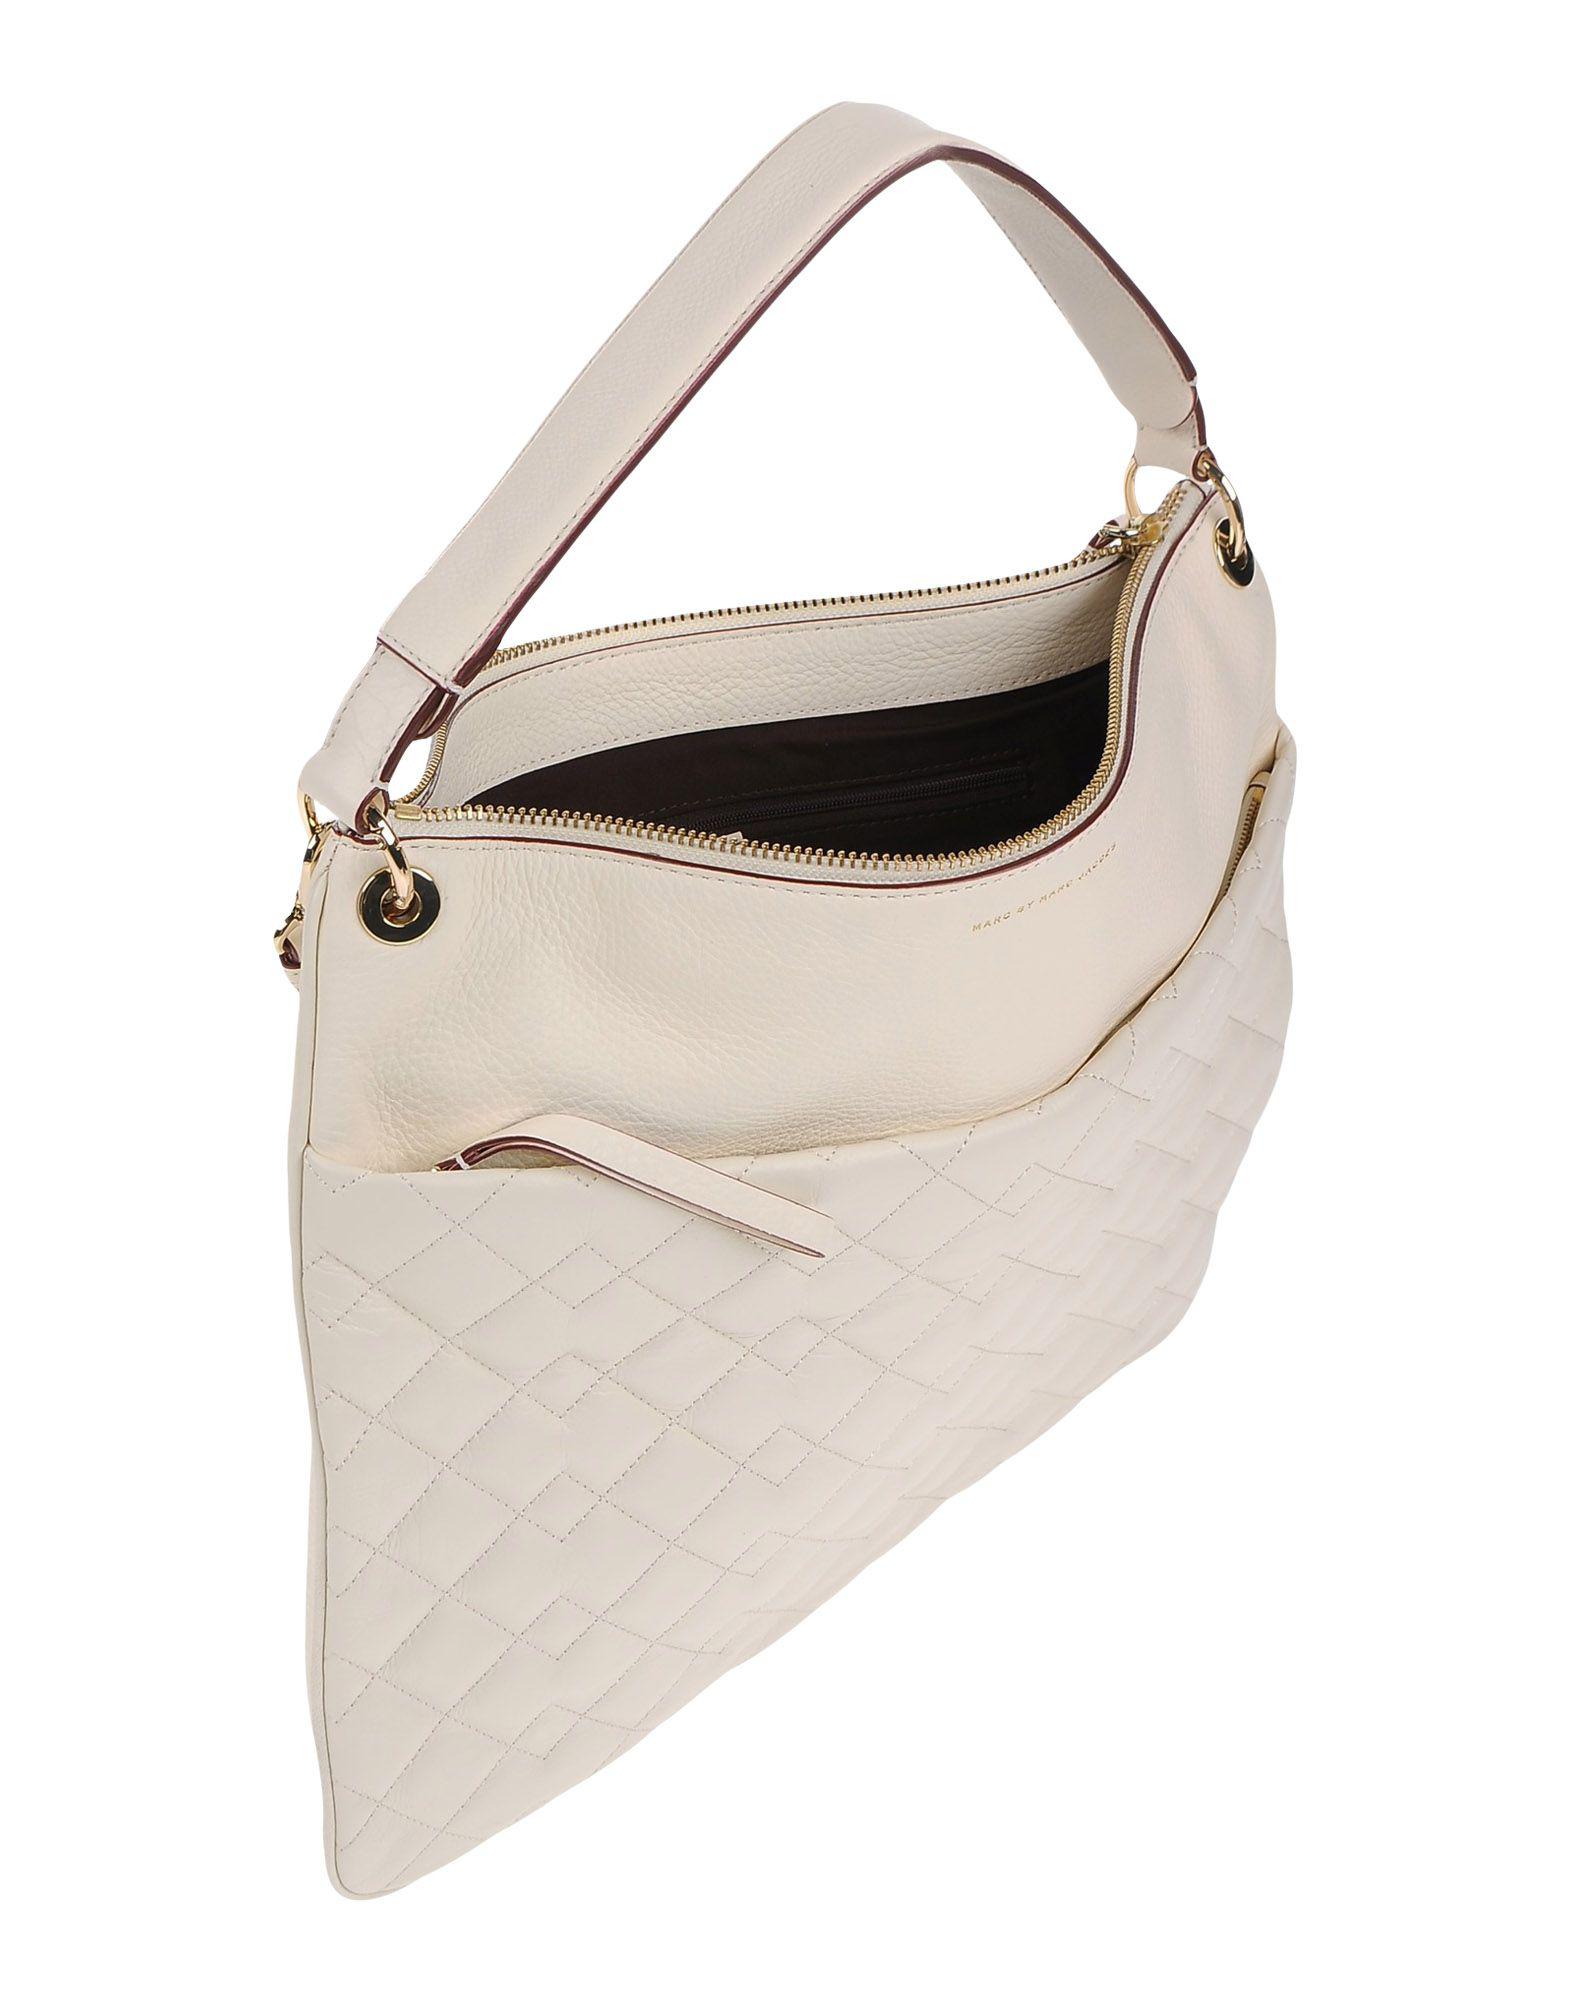 Lyst - Marc By Marc Jacobs Handbag in White